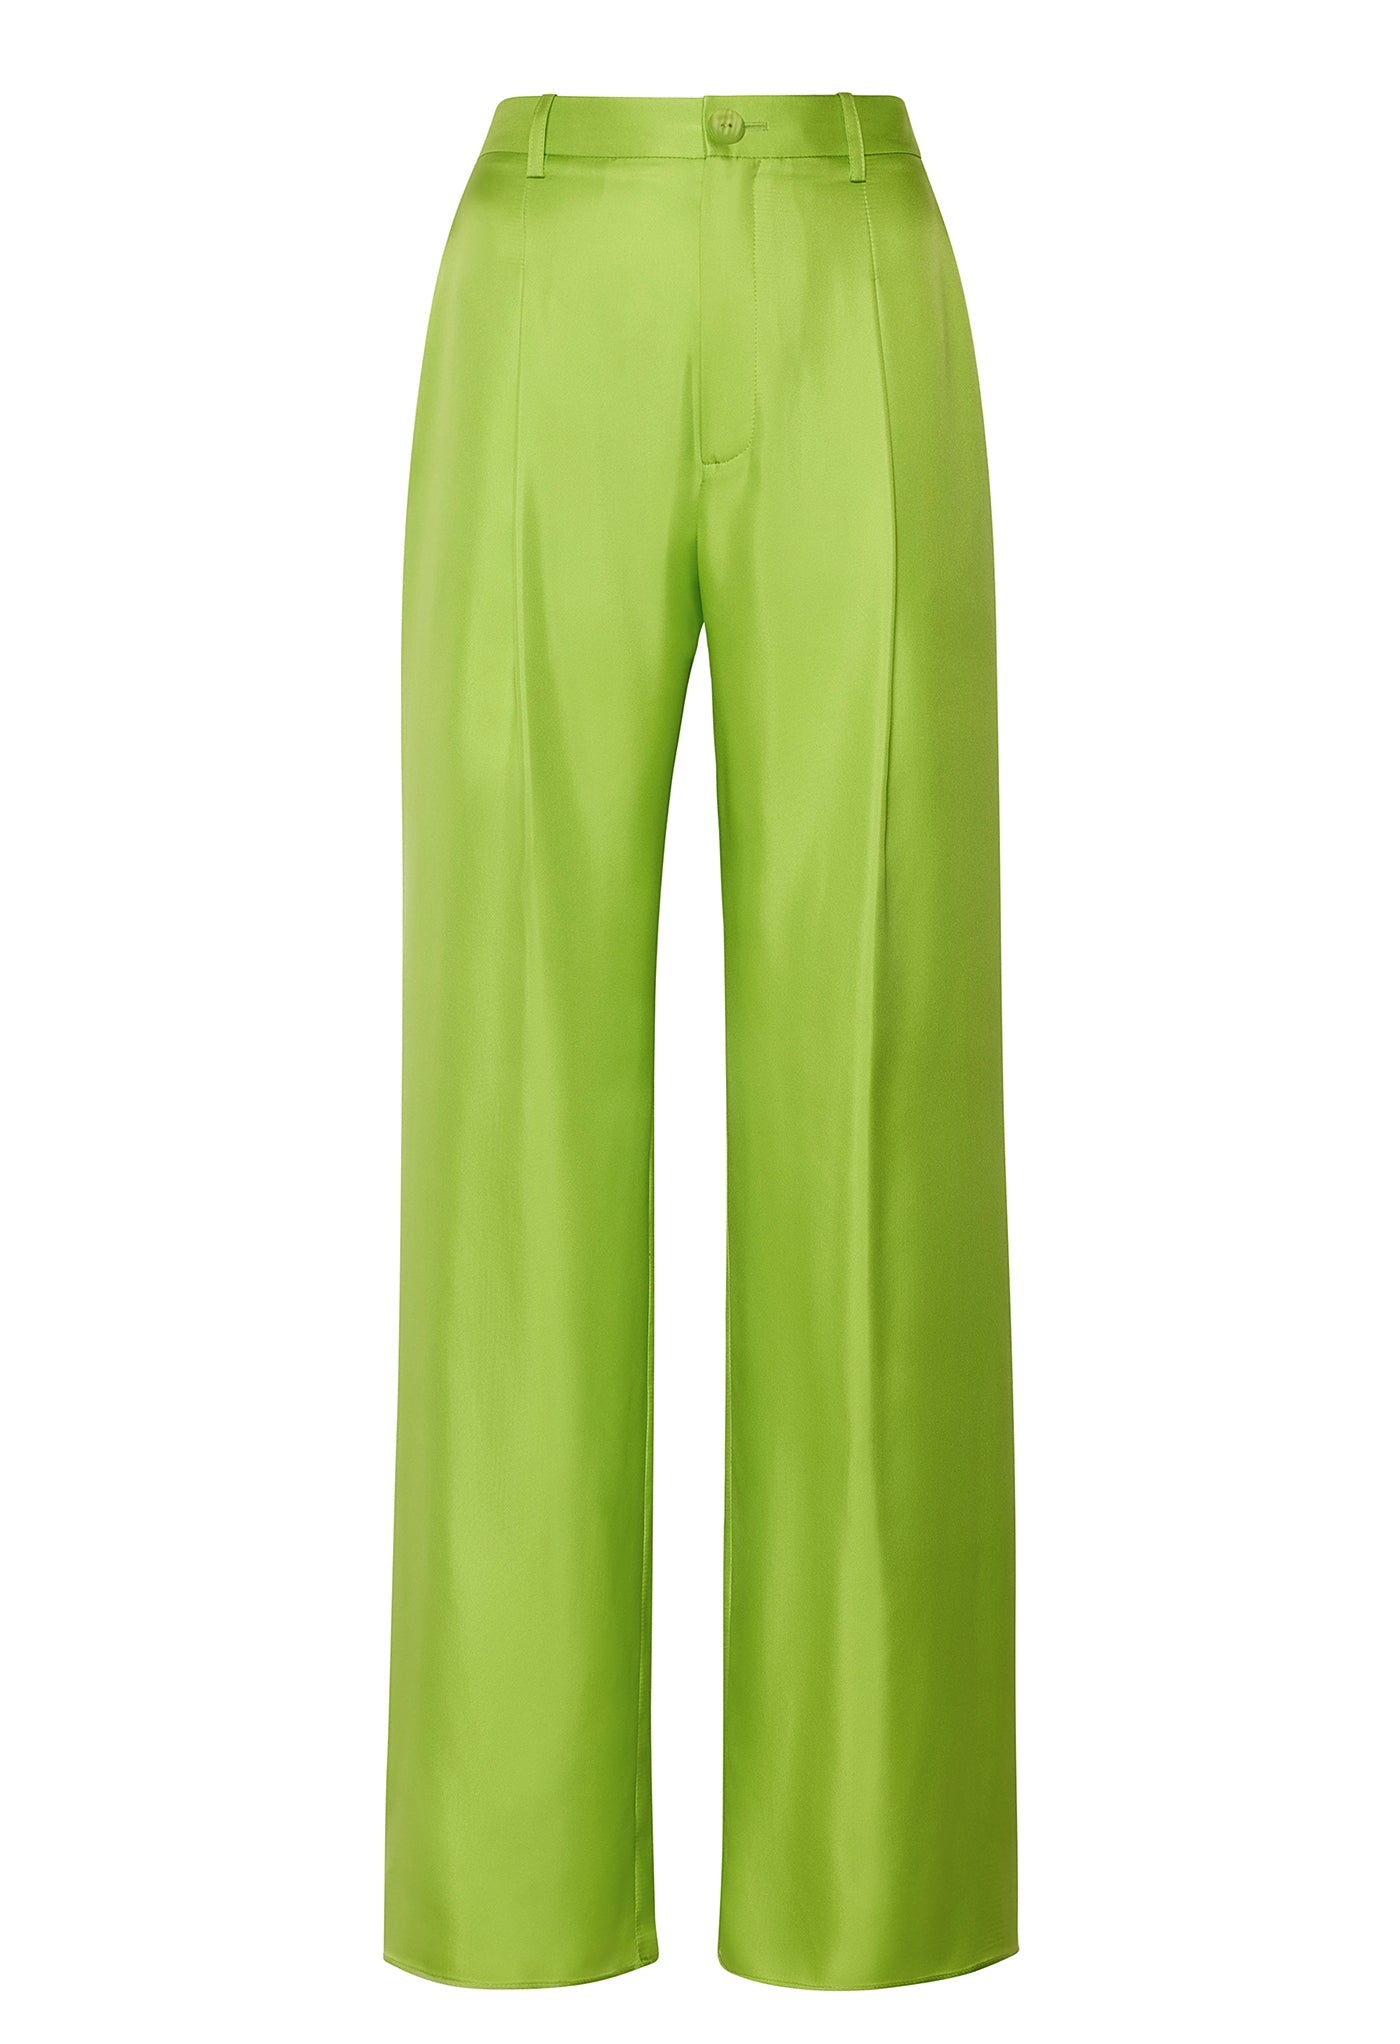 SILKY TWILL RELAXED PLEATED PANT - LAPOINTE